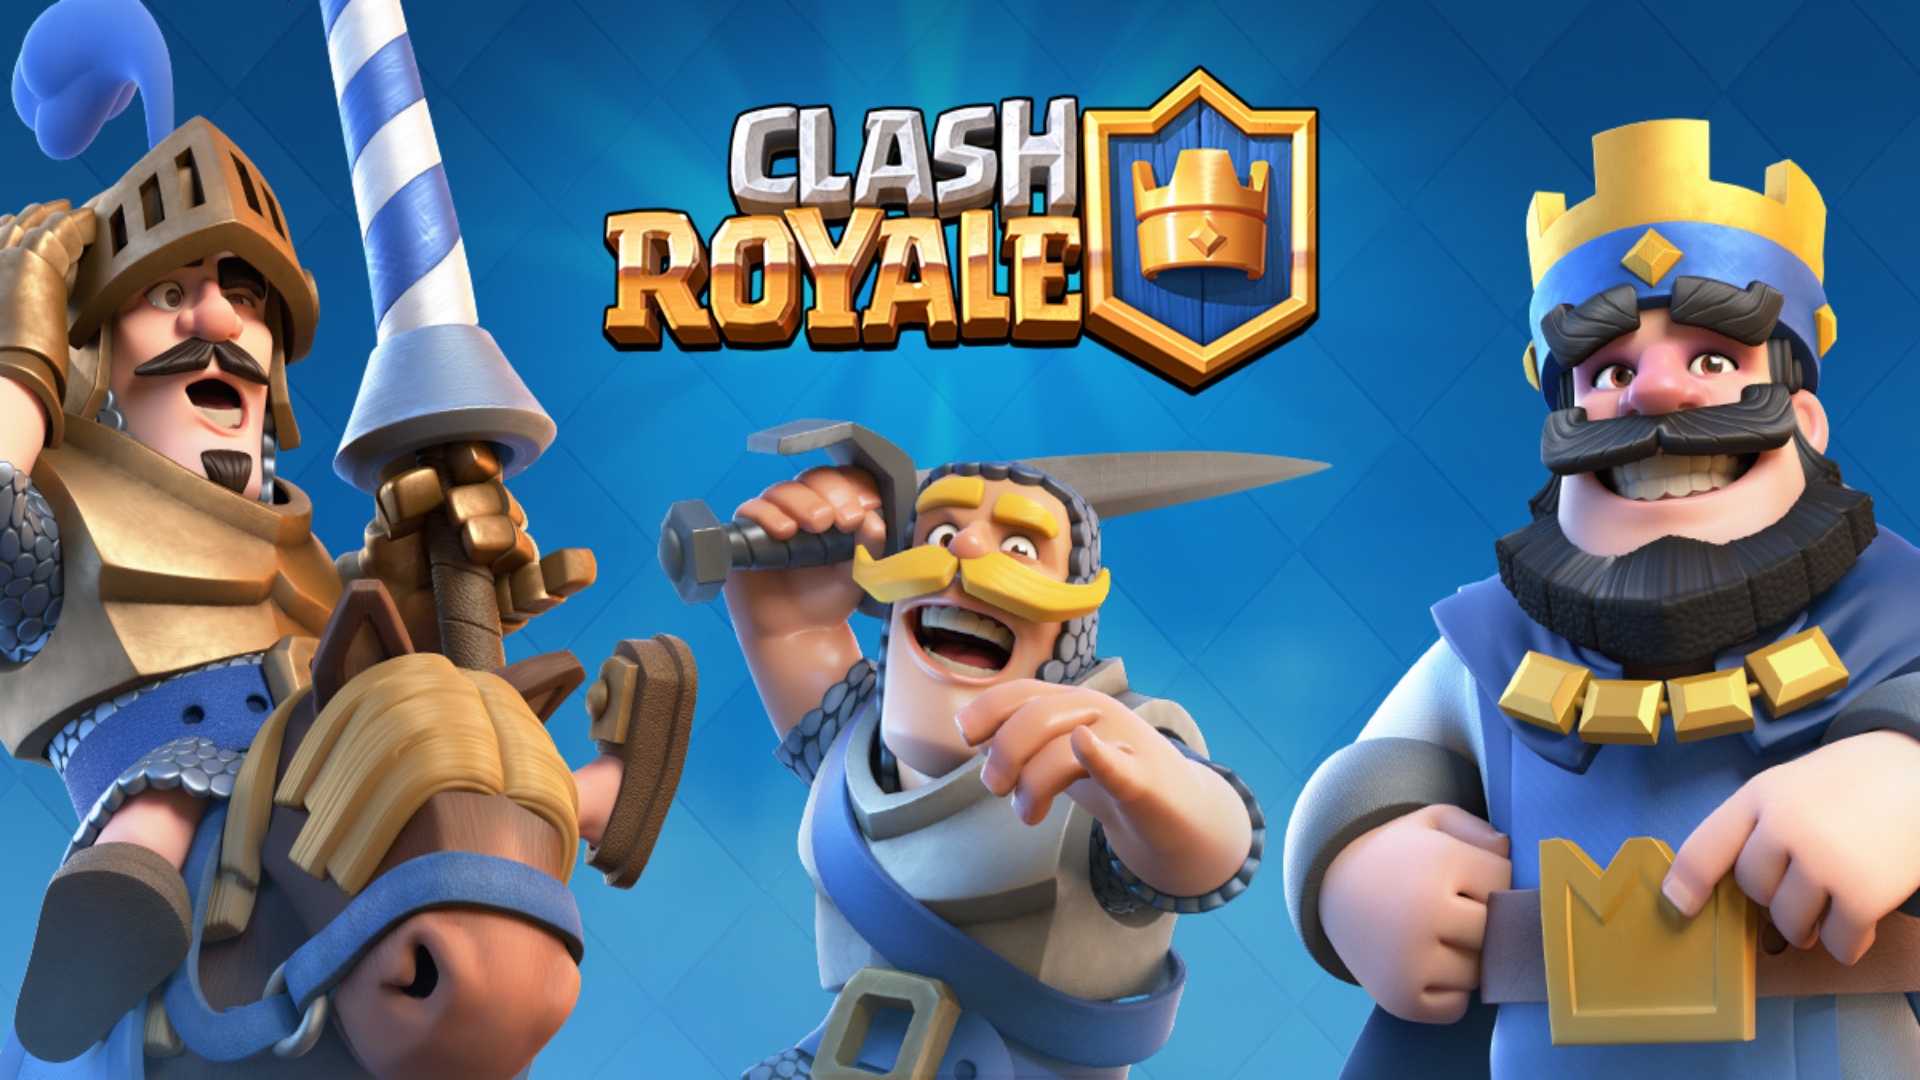 Characters from Clash Royale.